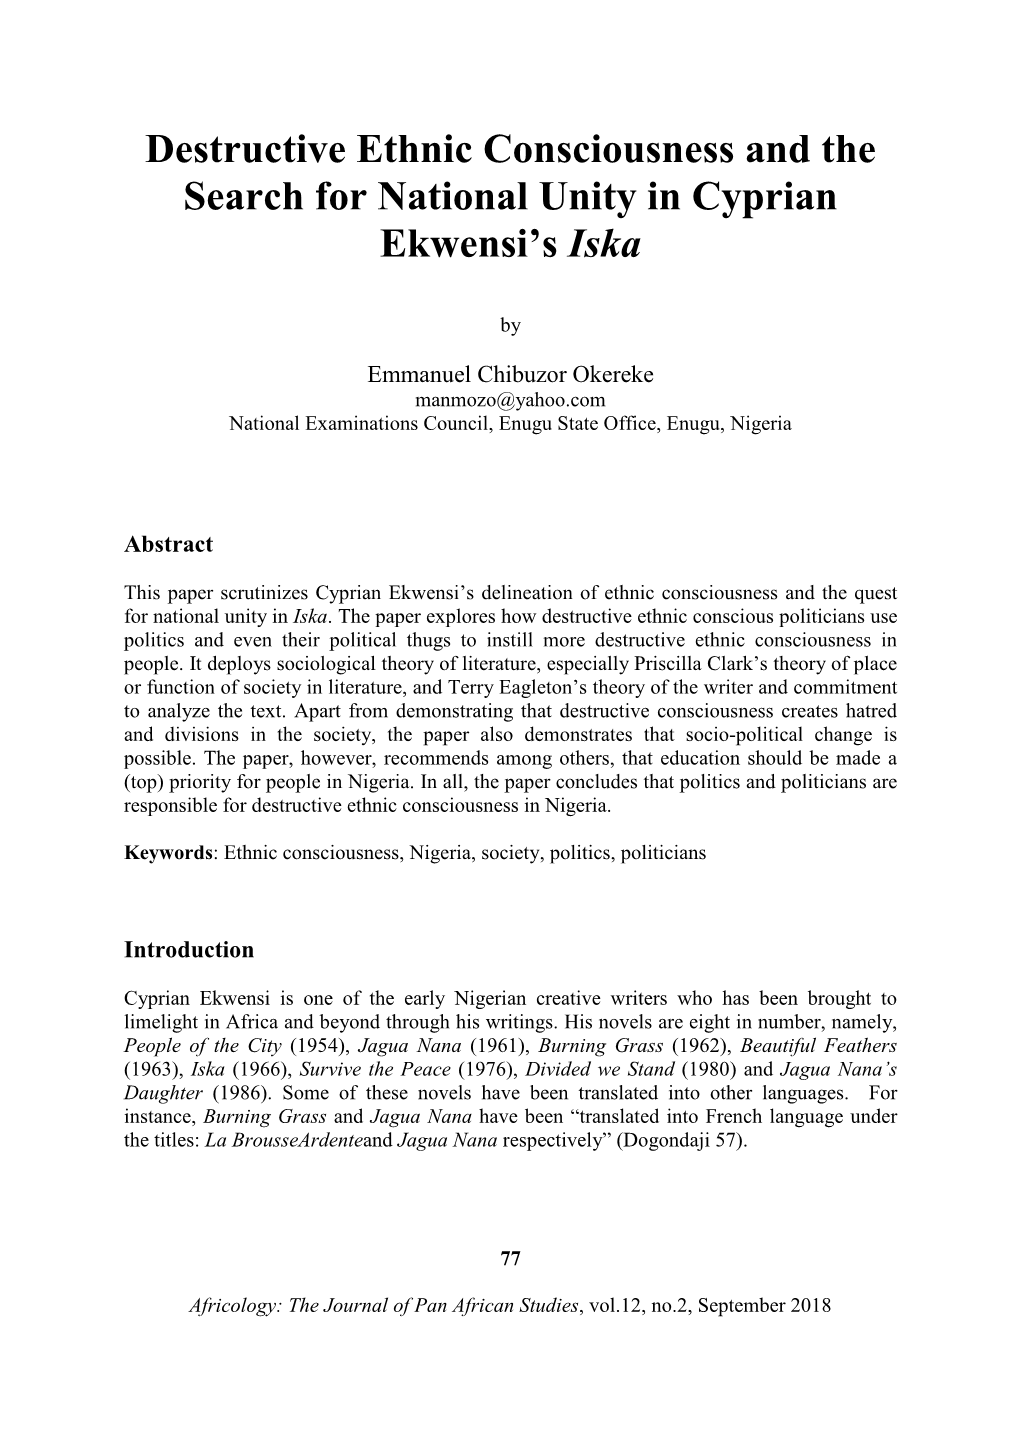 Destructive Ethnic Consciousness and the Search for National Unity in Cyprian Ekwensi’S Iska